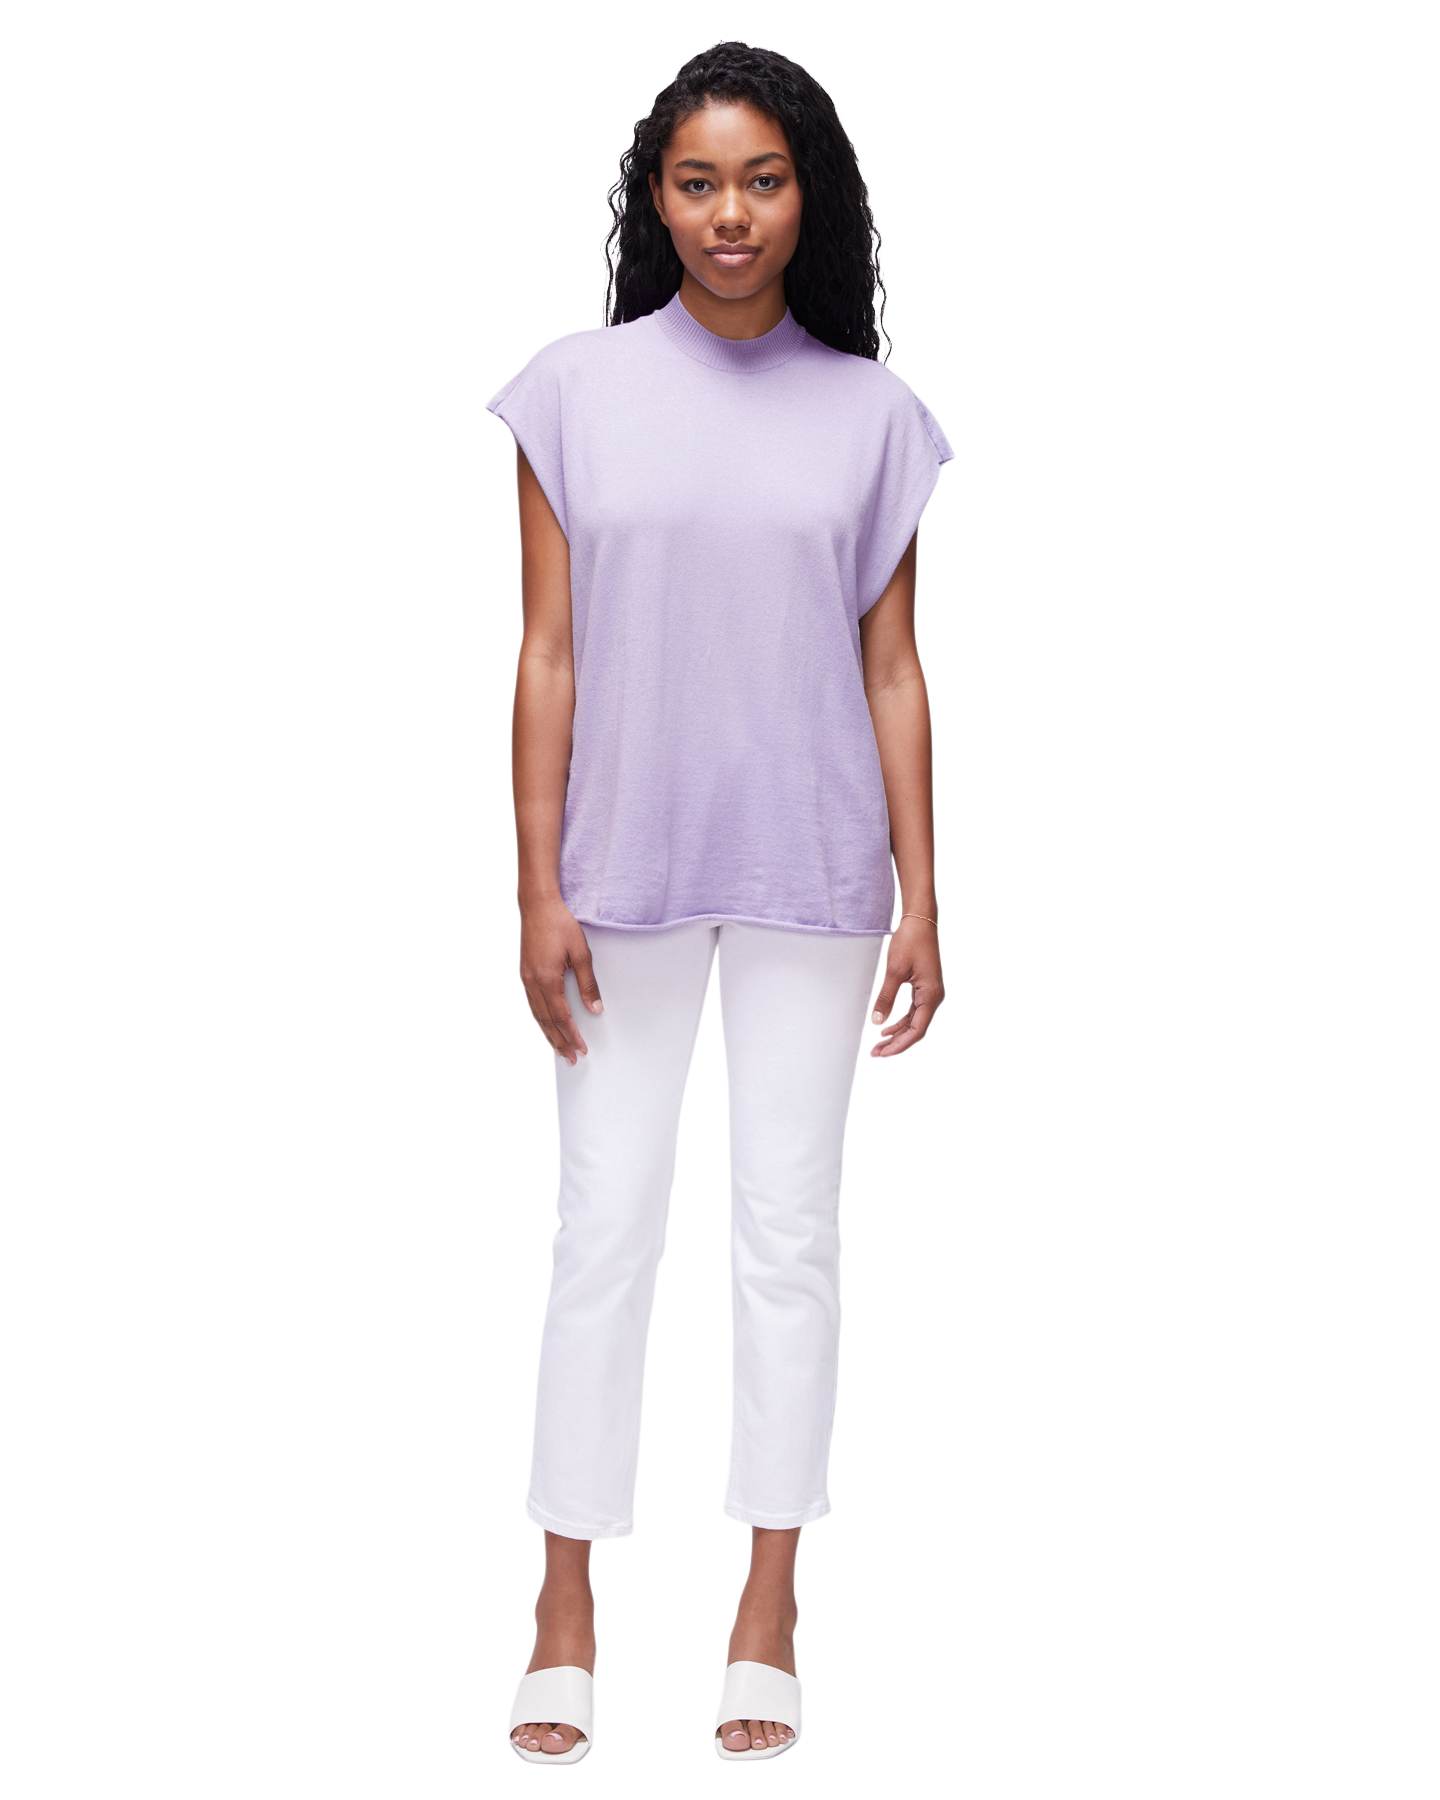 Unisex Muscle Tee in | DSTLD Lilac